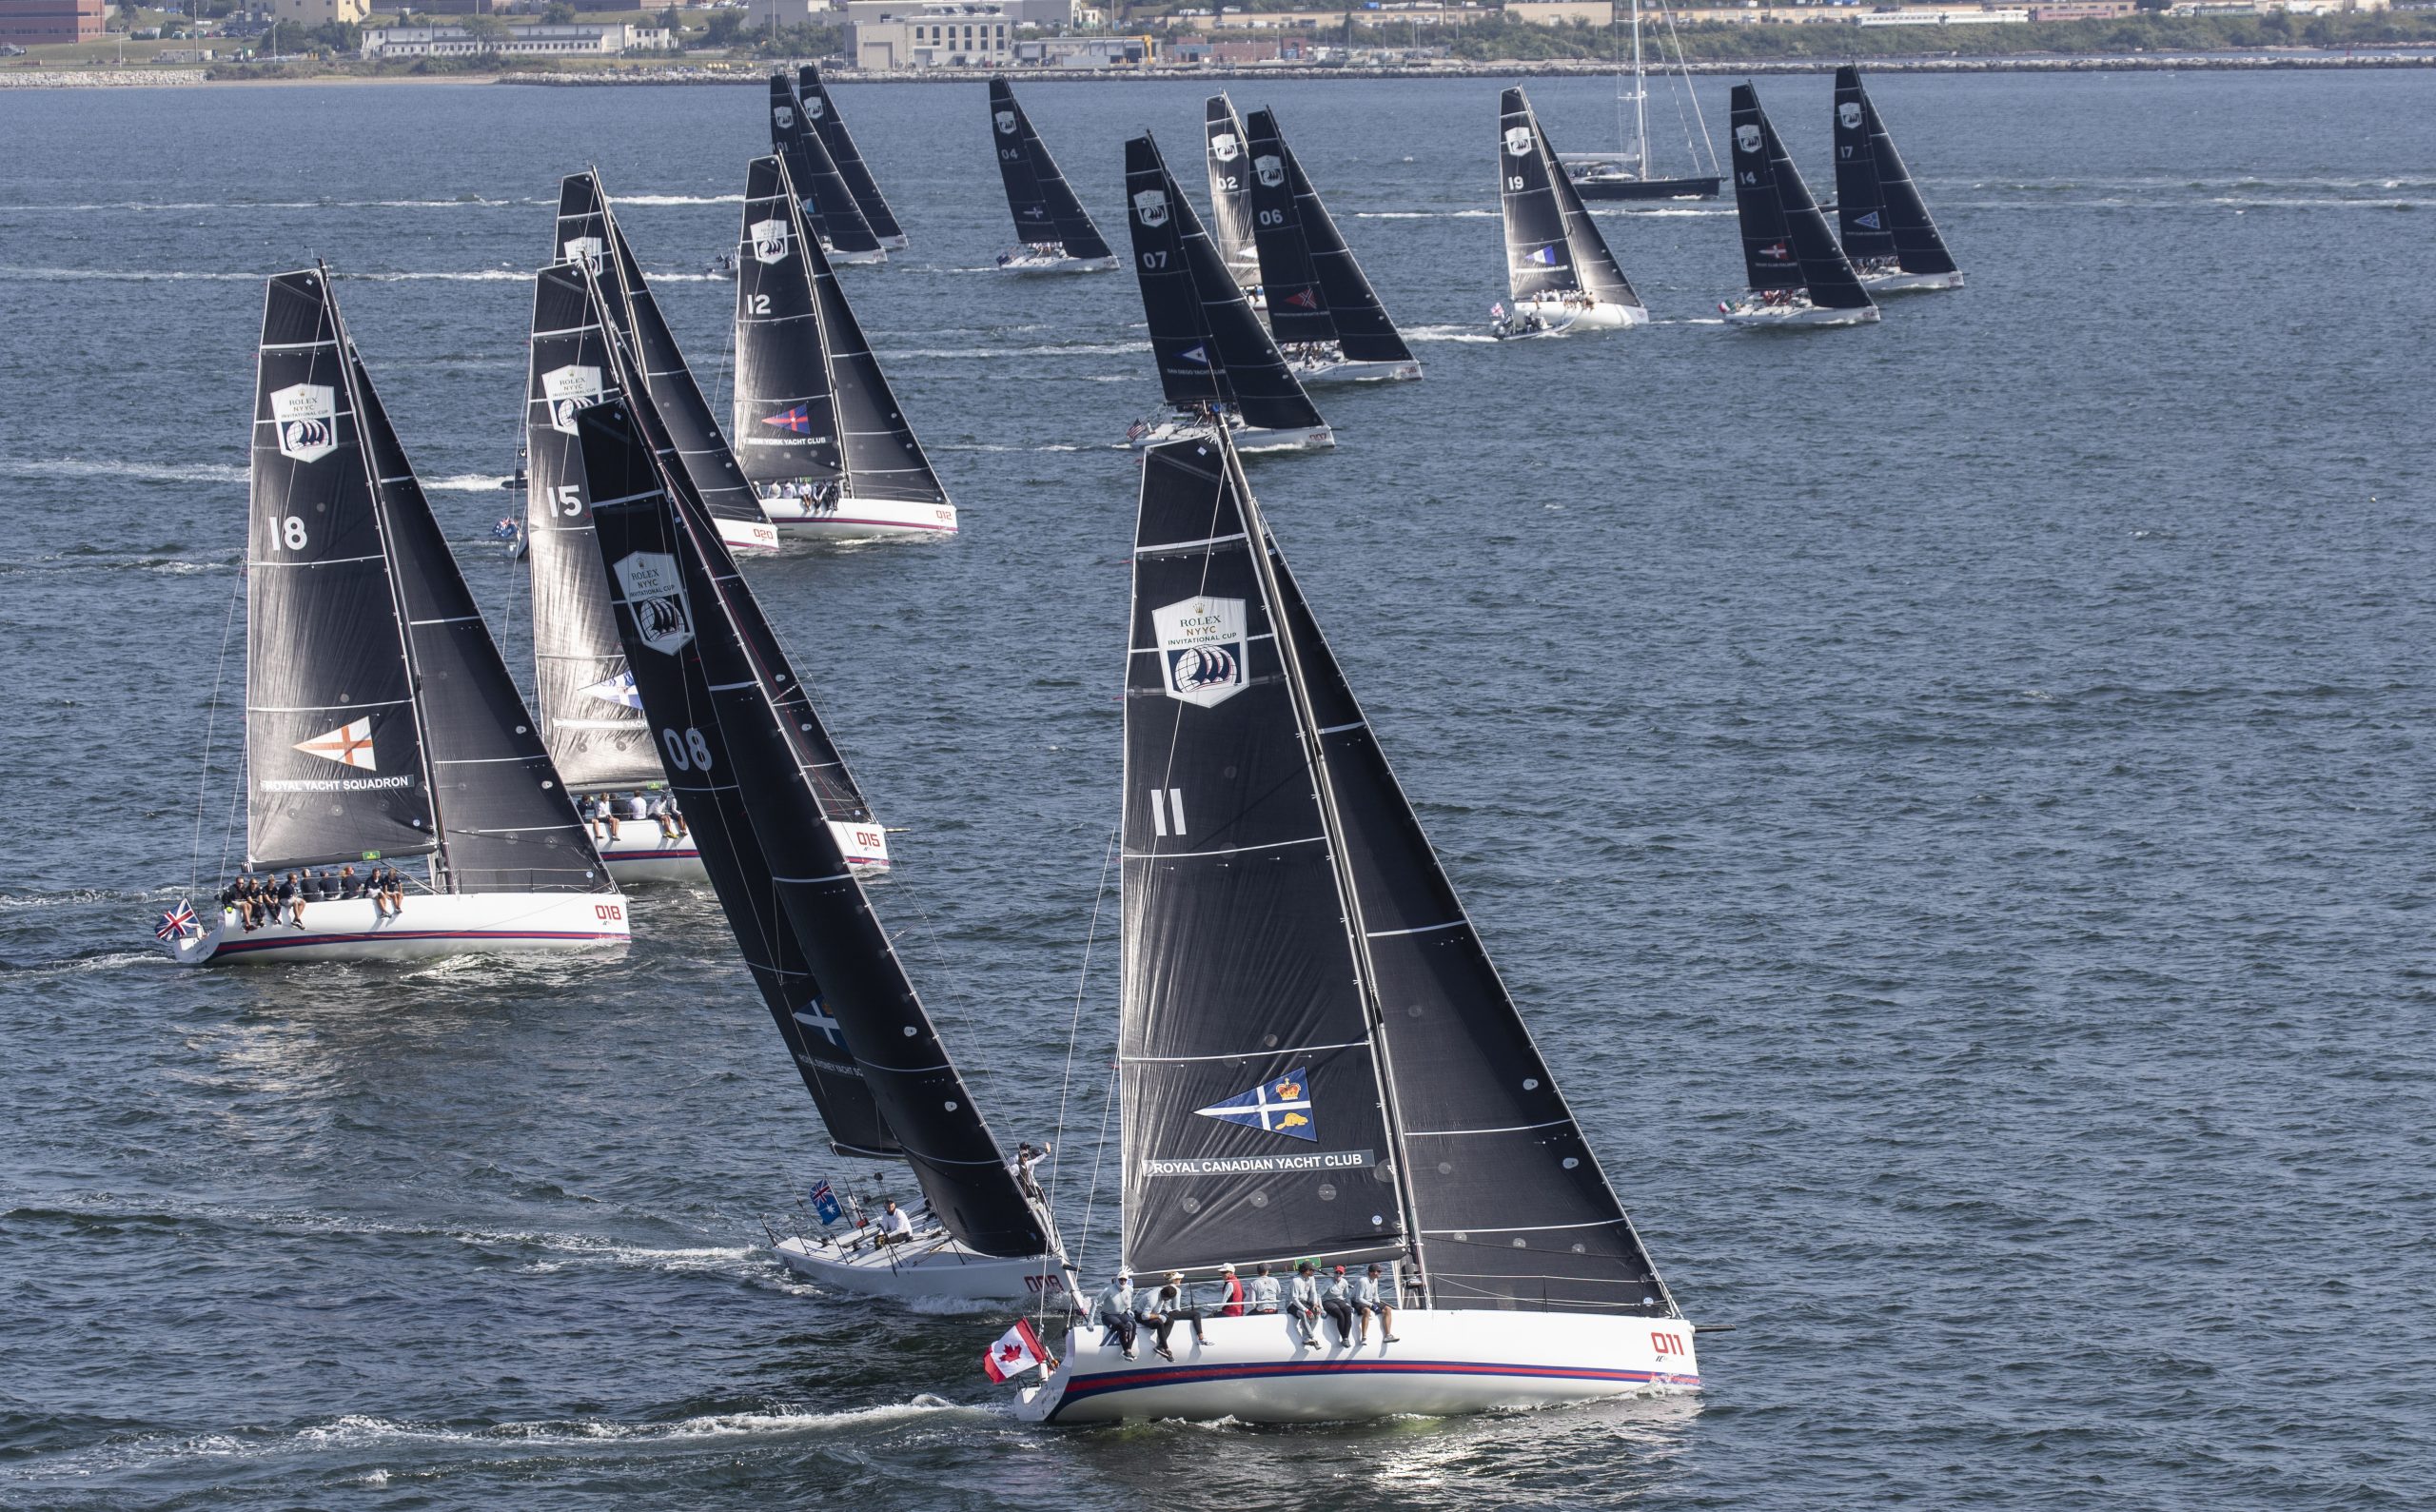 Two California Teams Head to Seventh Rolex NYYC Invitational Cup